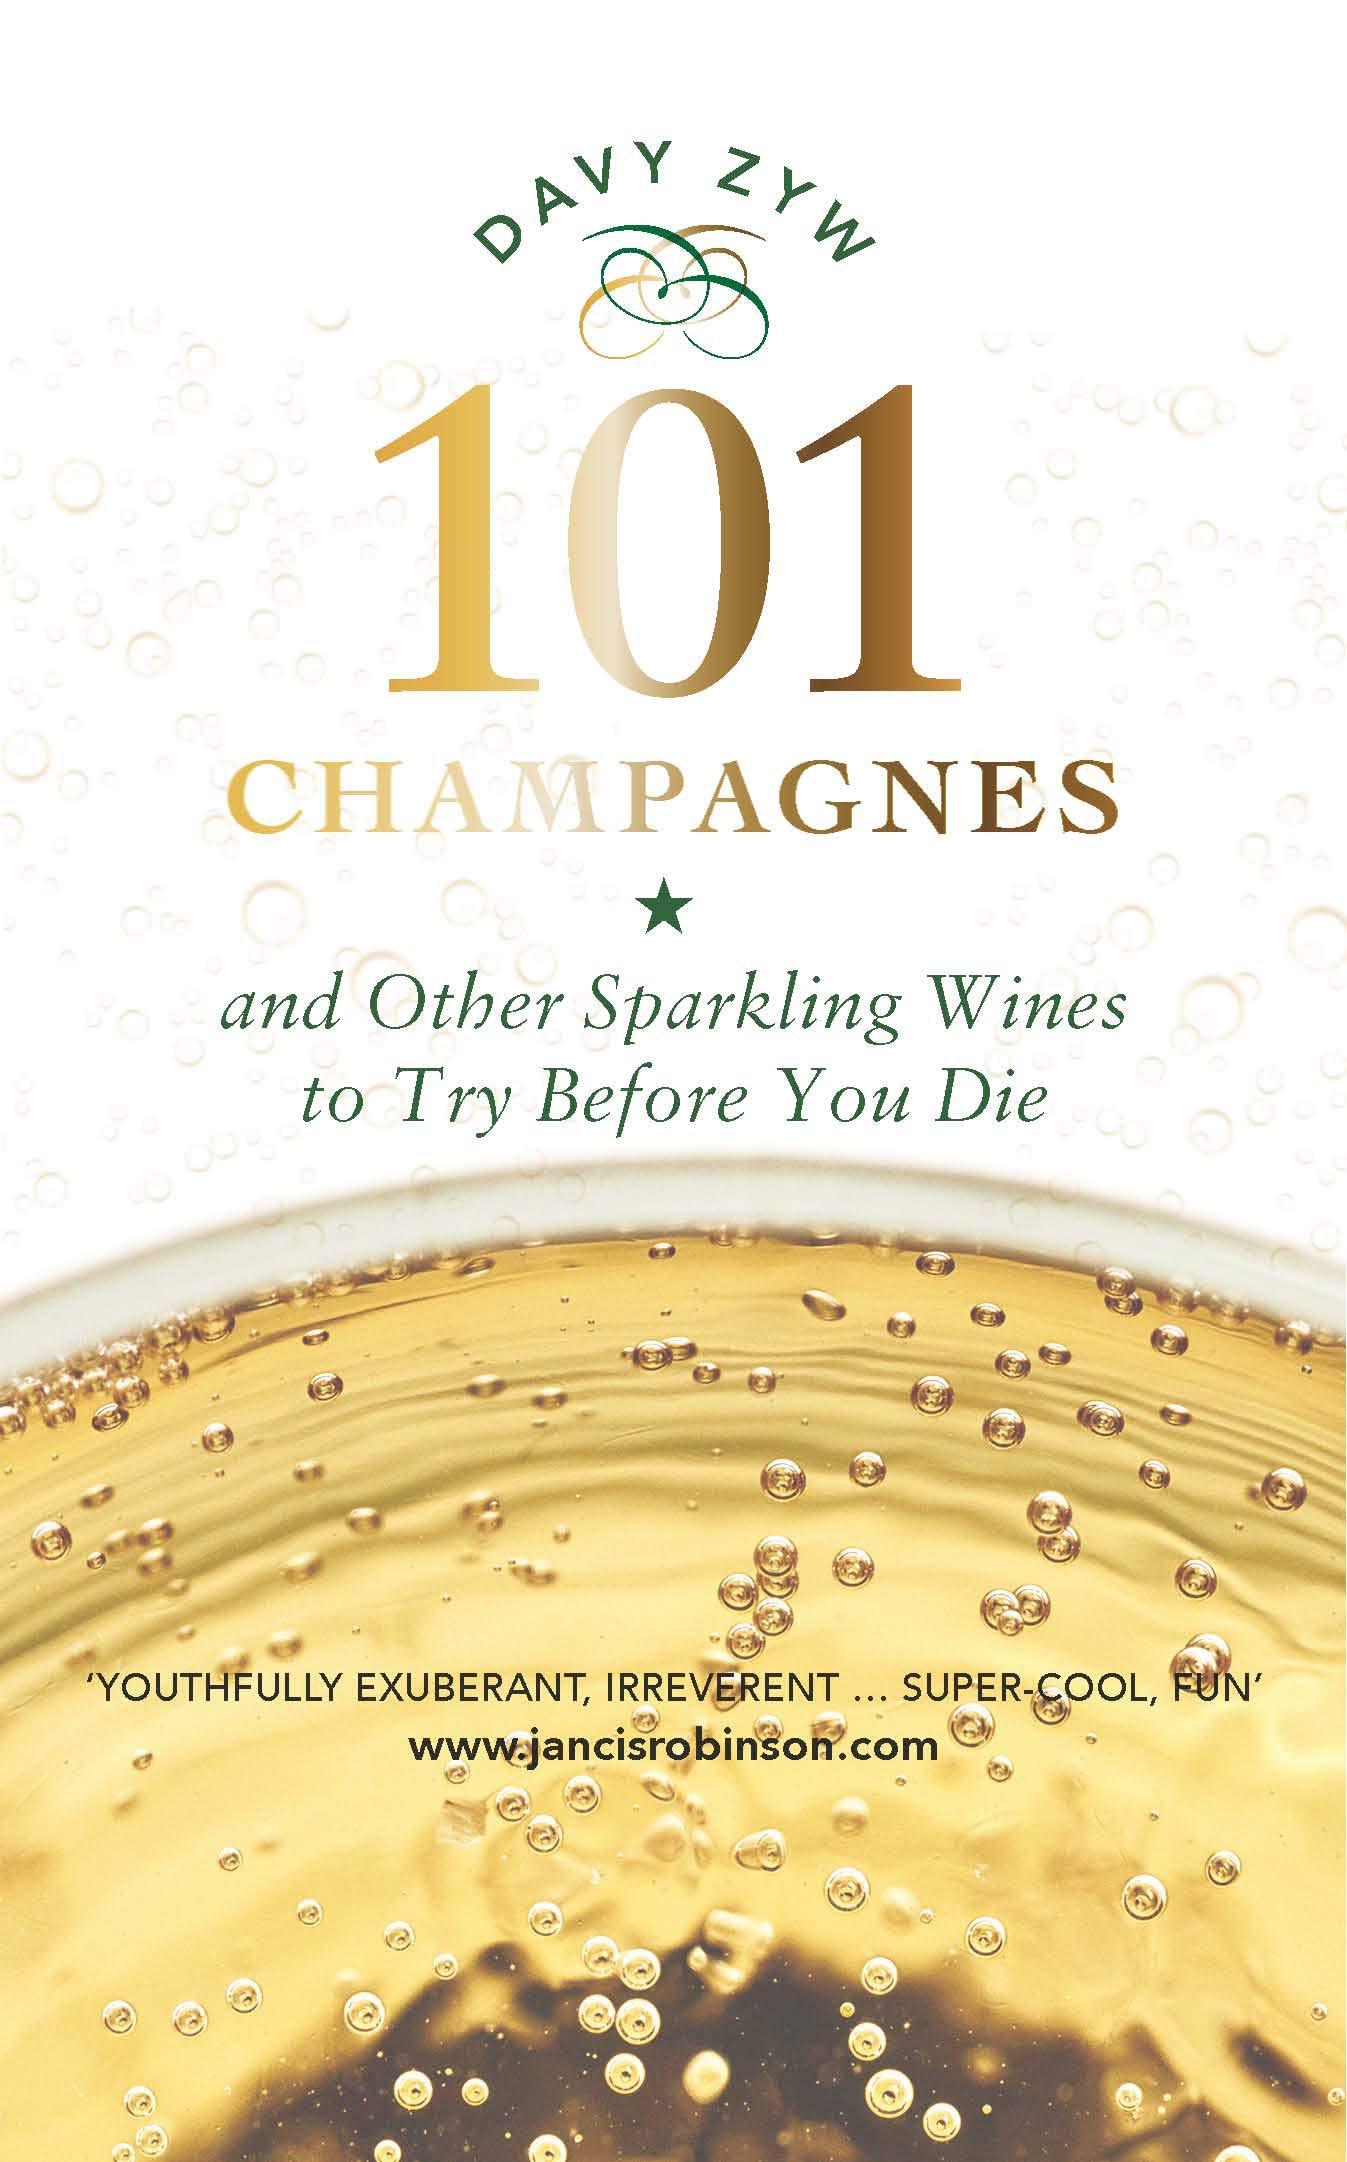 101 CHAMPAGNES AND OTHER SPARKLING WINES TO TRY BE